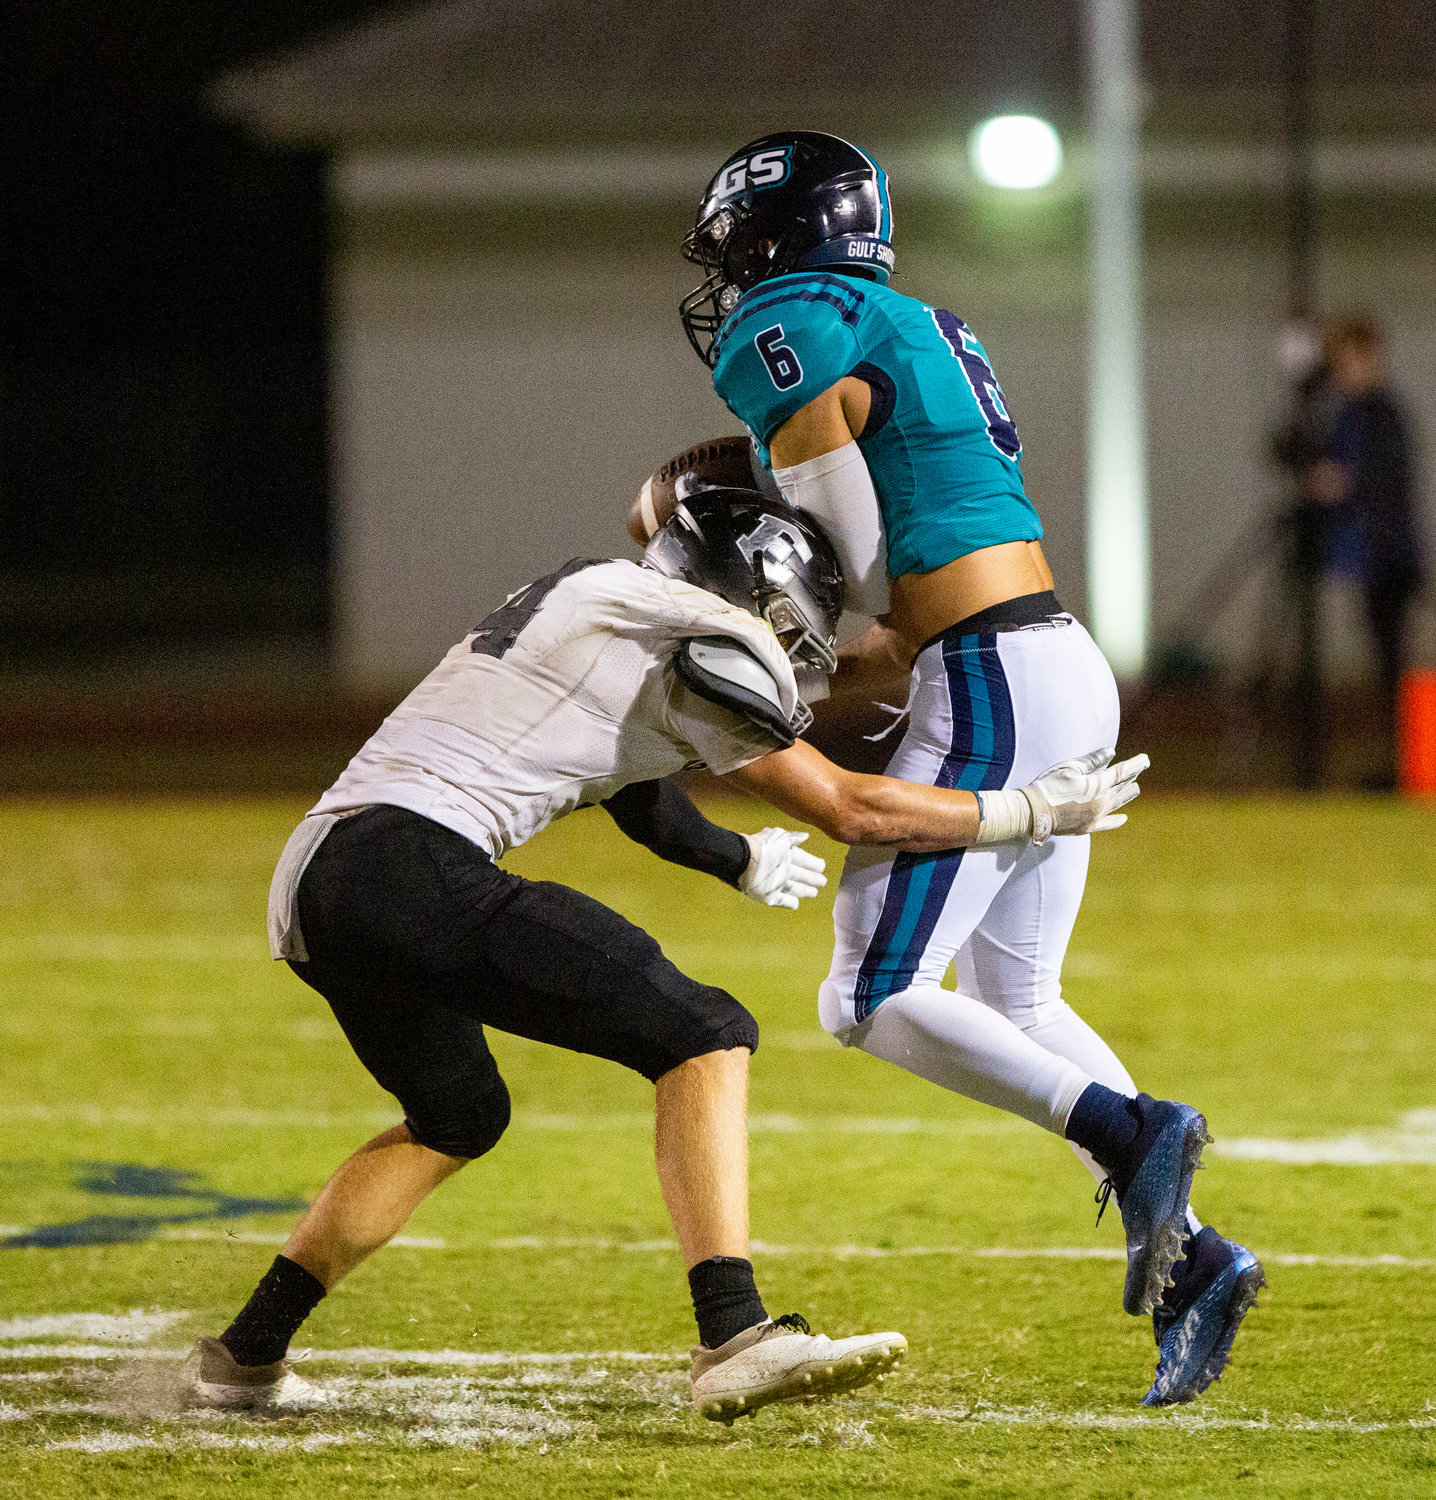 Elberta senior Holden Crook (4) breaks up a pass intended for Gulf Shores senior Bo Lindsey (6) in the first half of the Warriors’ Class 5A Region 1 contest against the Dolphins on the road Thursday night.